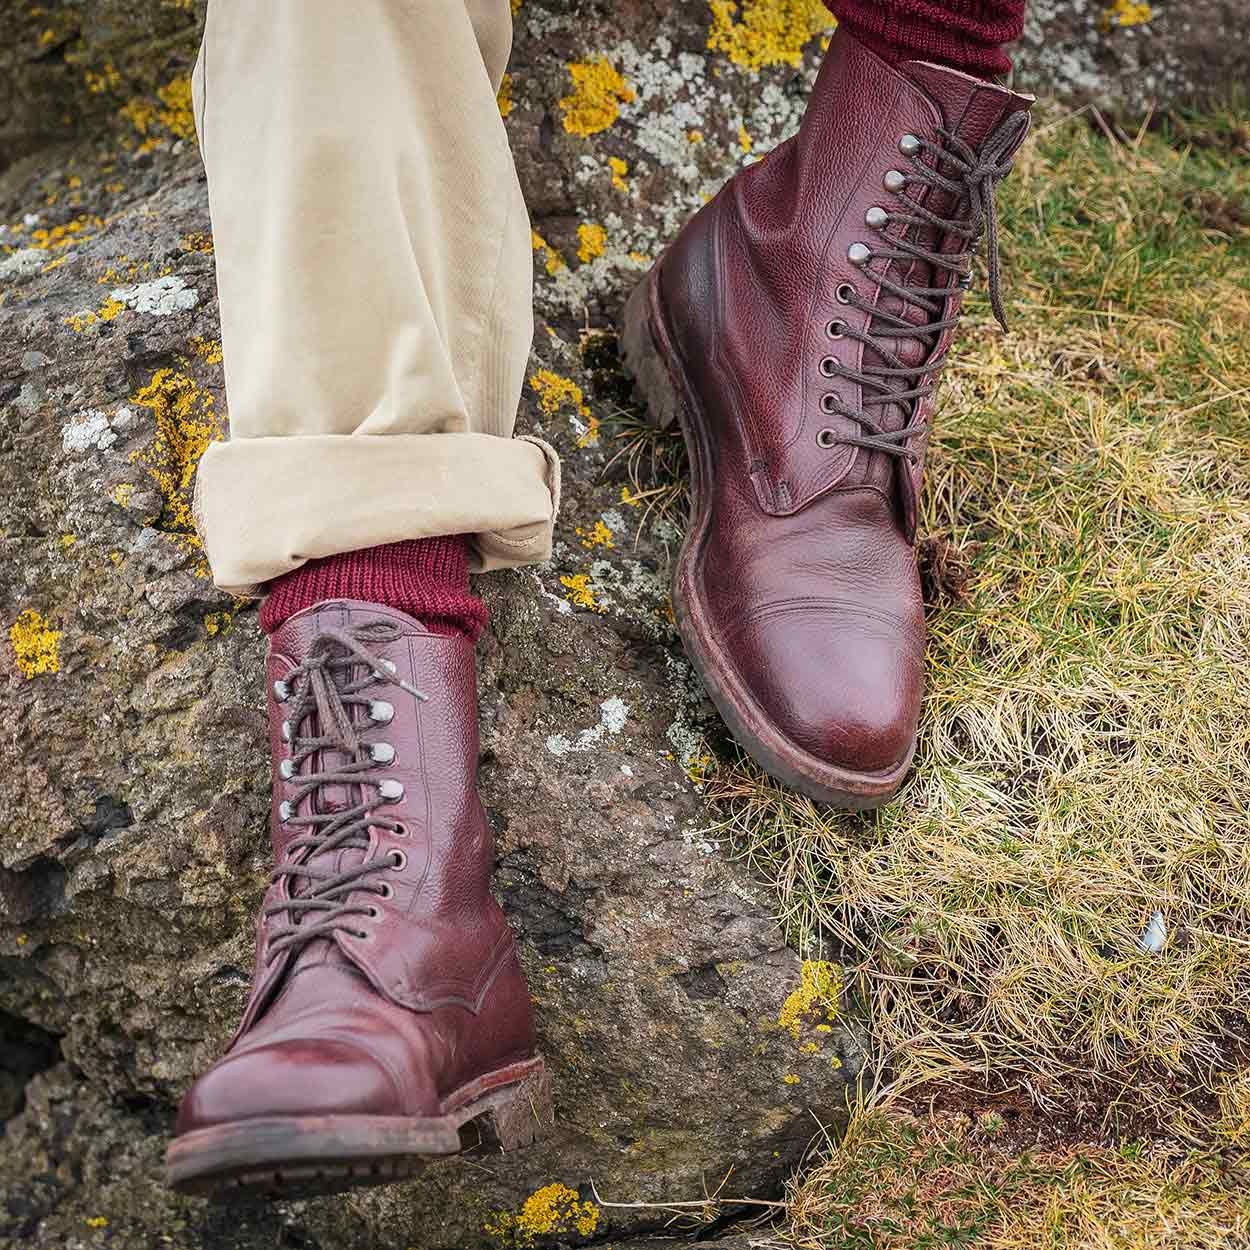 Hoggs of Fife Rannoch Veldtschoen Lace Boots - Non-Safety Work Boots & Shoes  - Safety Footwear - Best Workwear